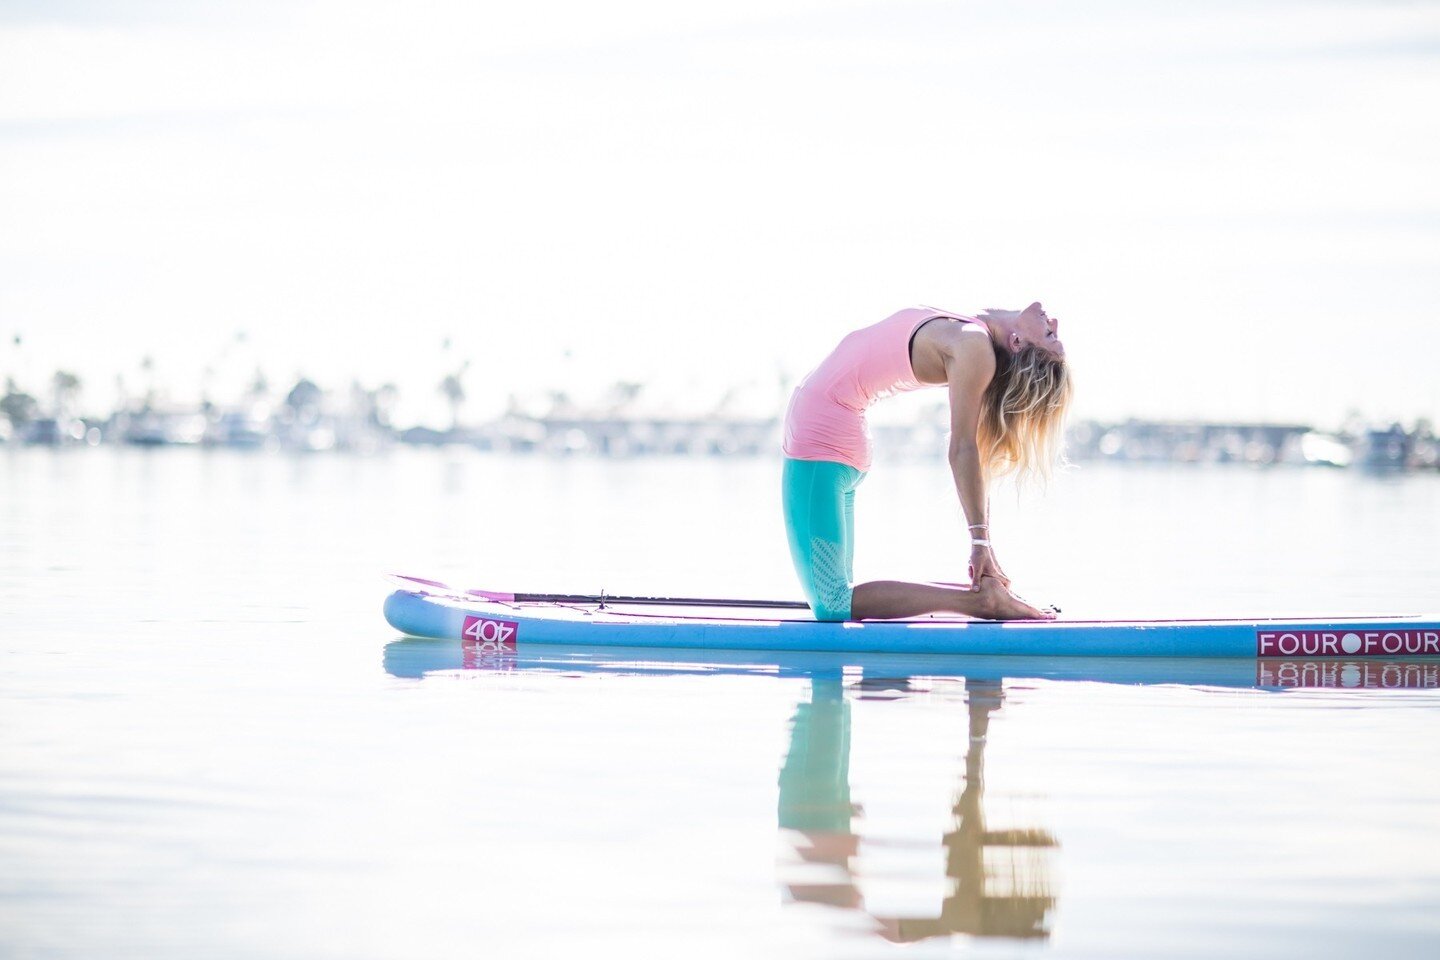 Happy Friday! ⁠
Stretch your body, exercise your mind, and feed your soul this weekend ✨⁠
⁠
#SUPlife #SUPyoga #healthyliving